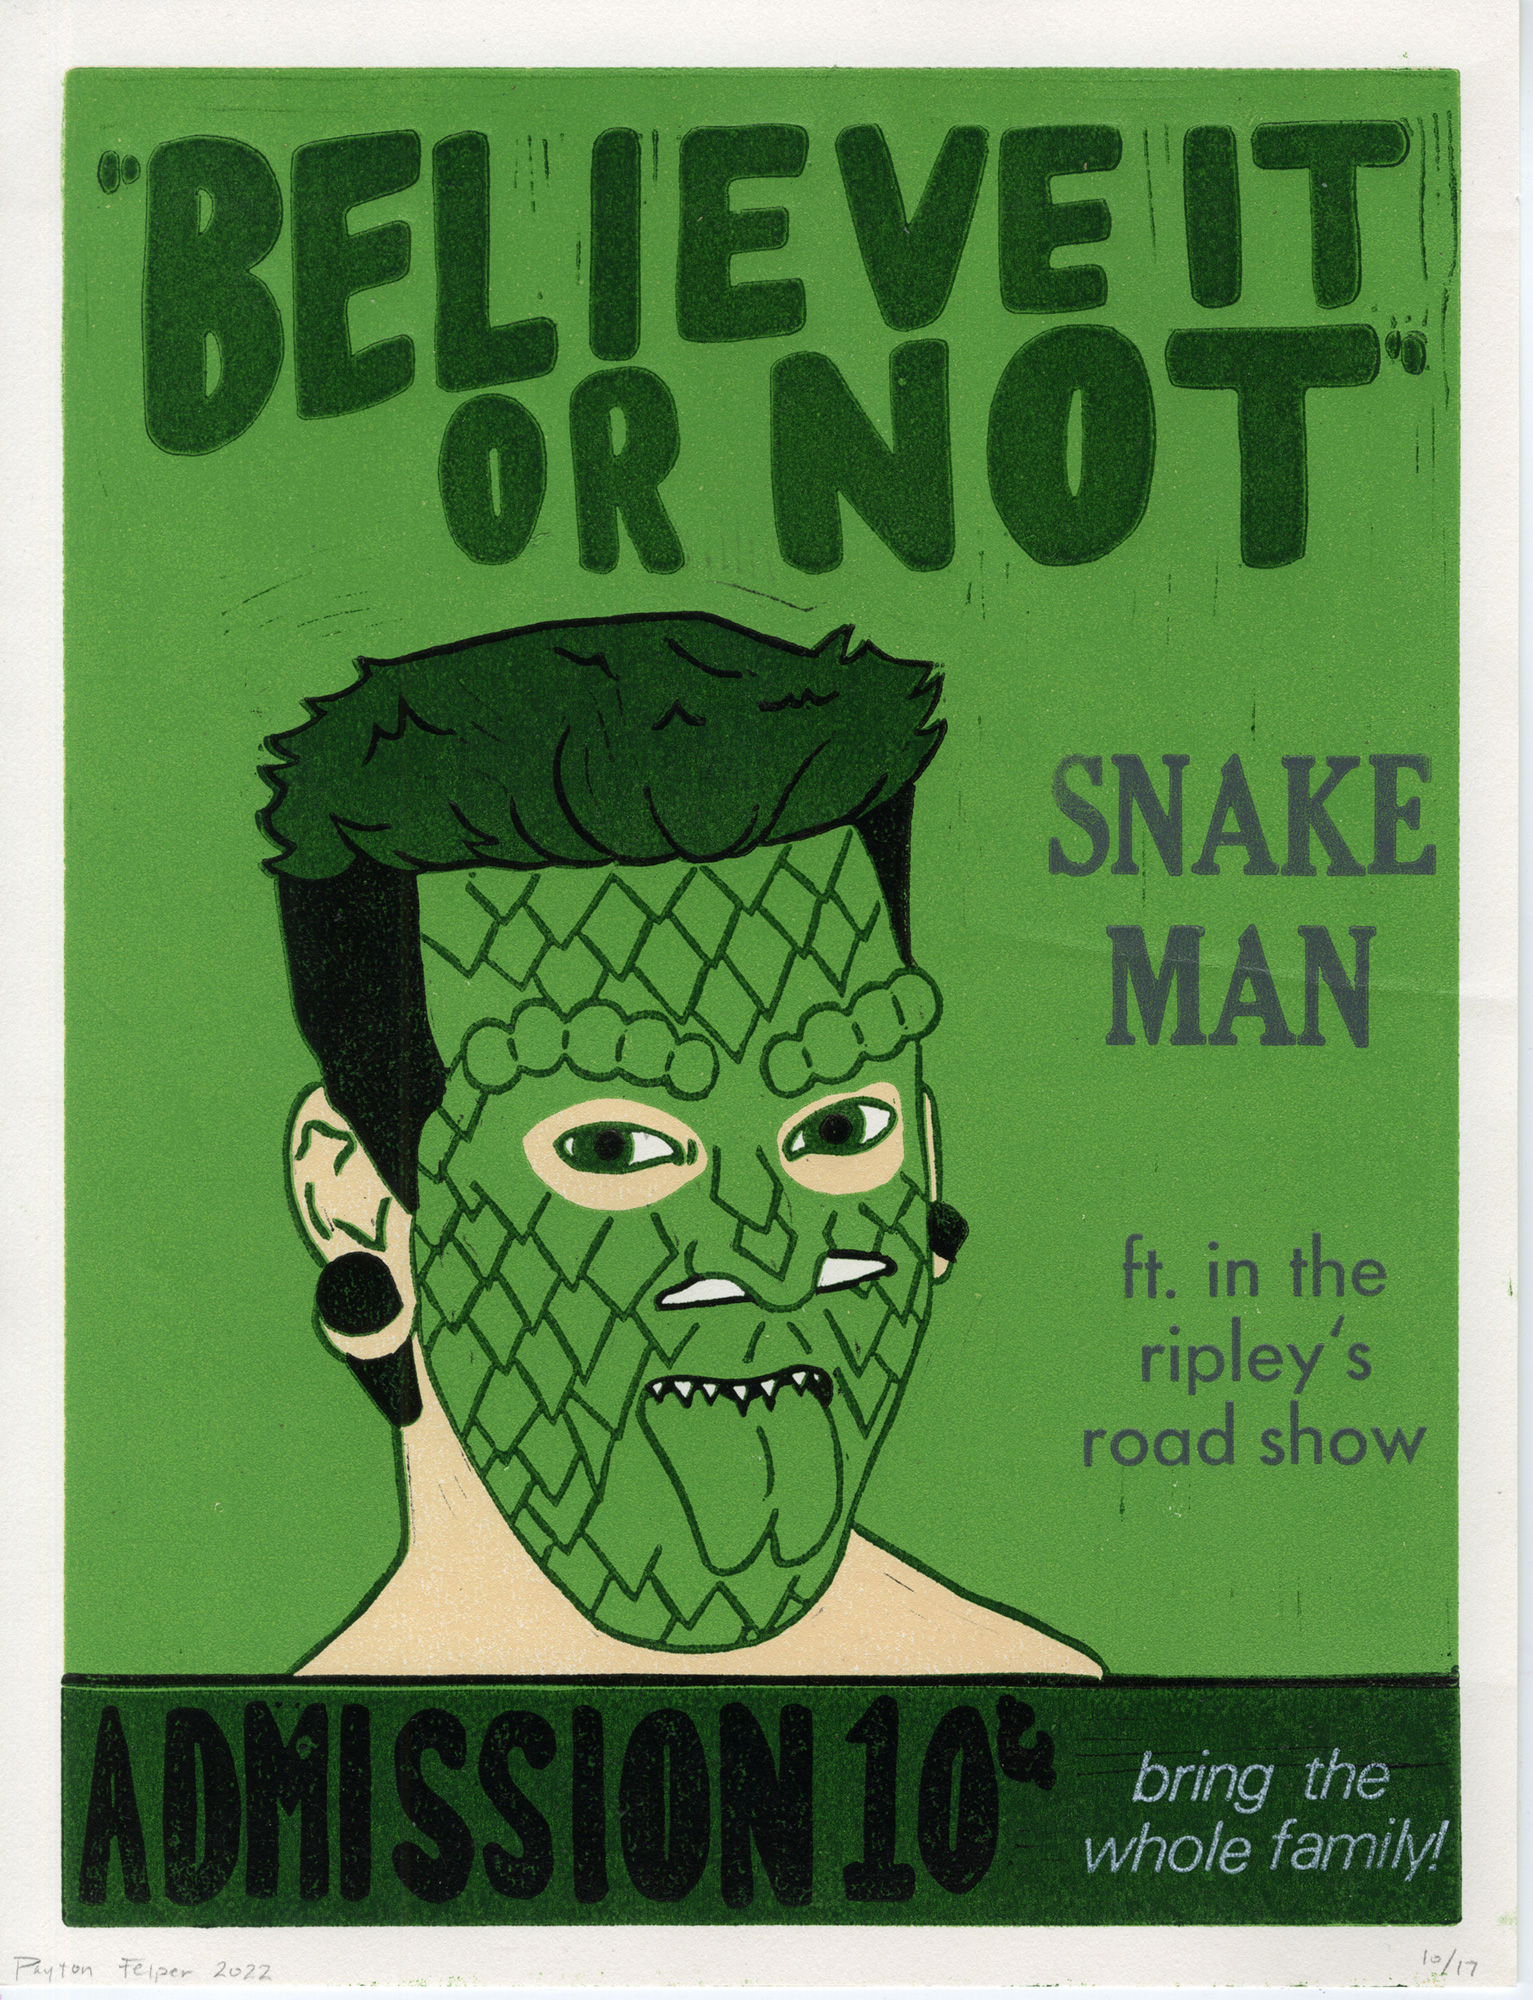 Believe it or not snake man poster